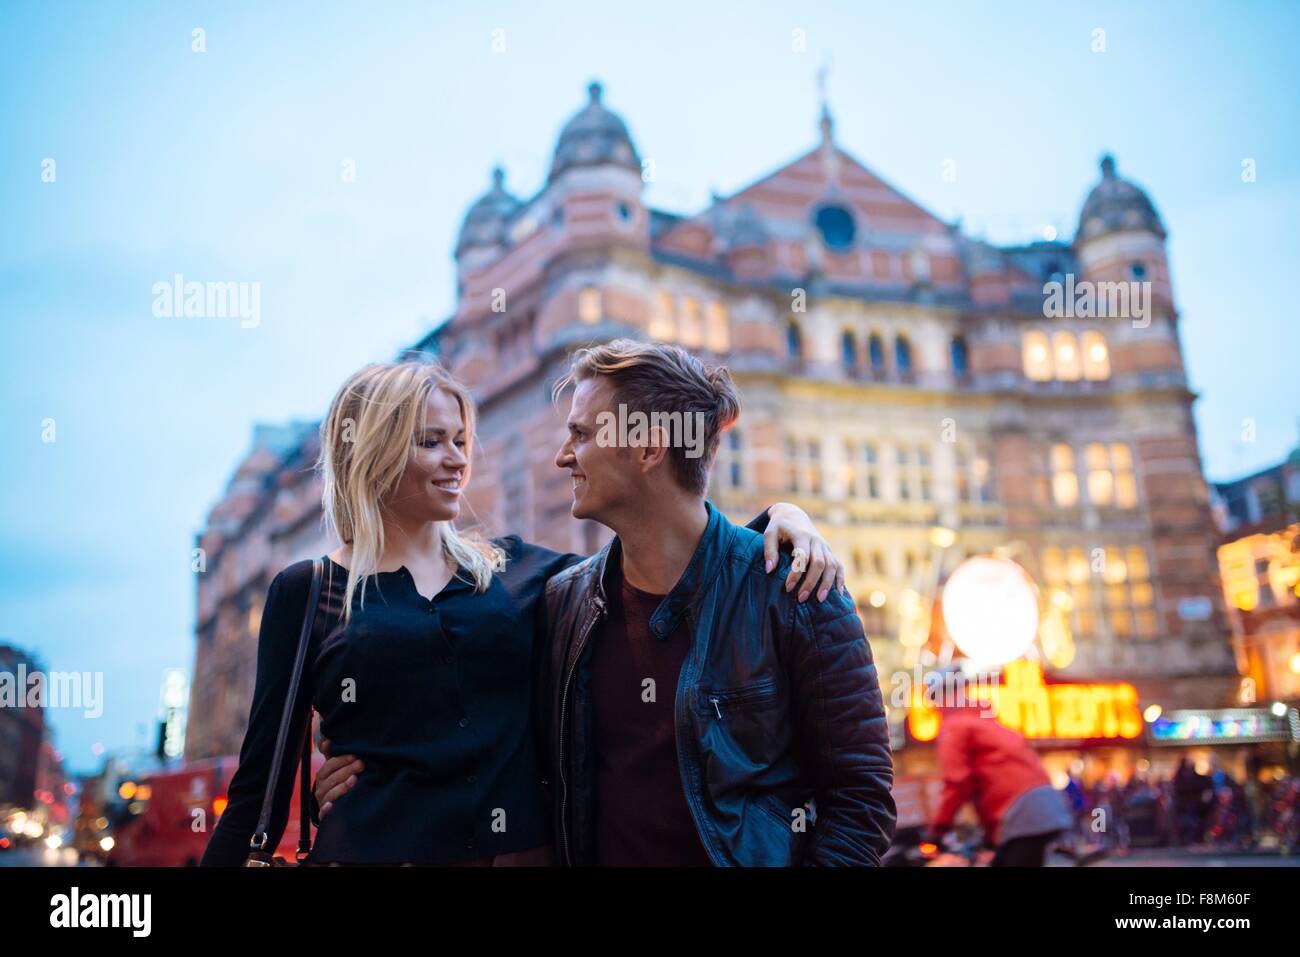 Jeune couple strolling on city street at night, London, England, UK Banque D'Images